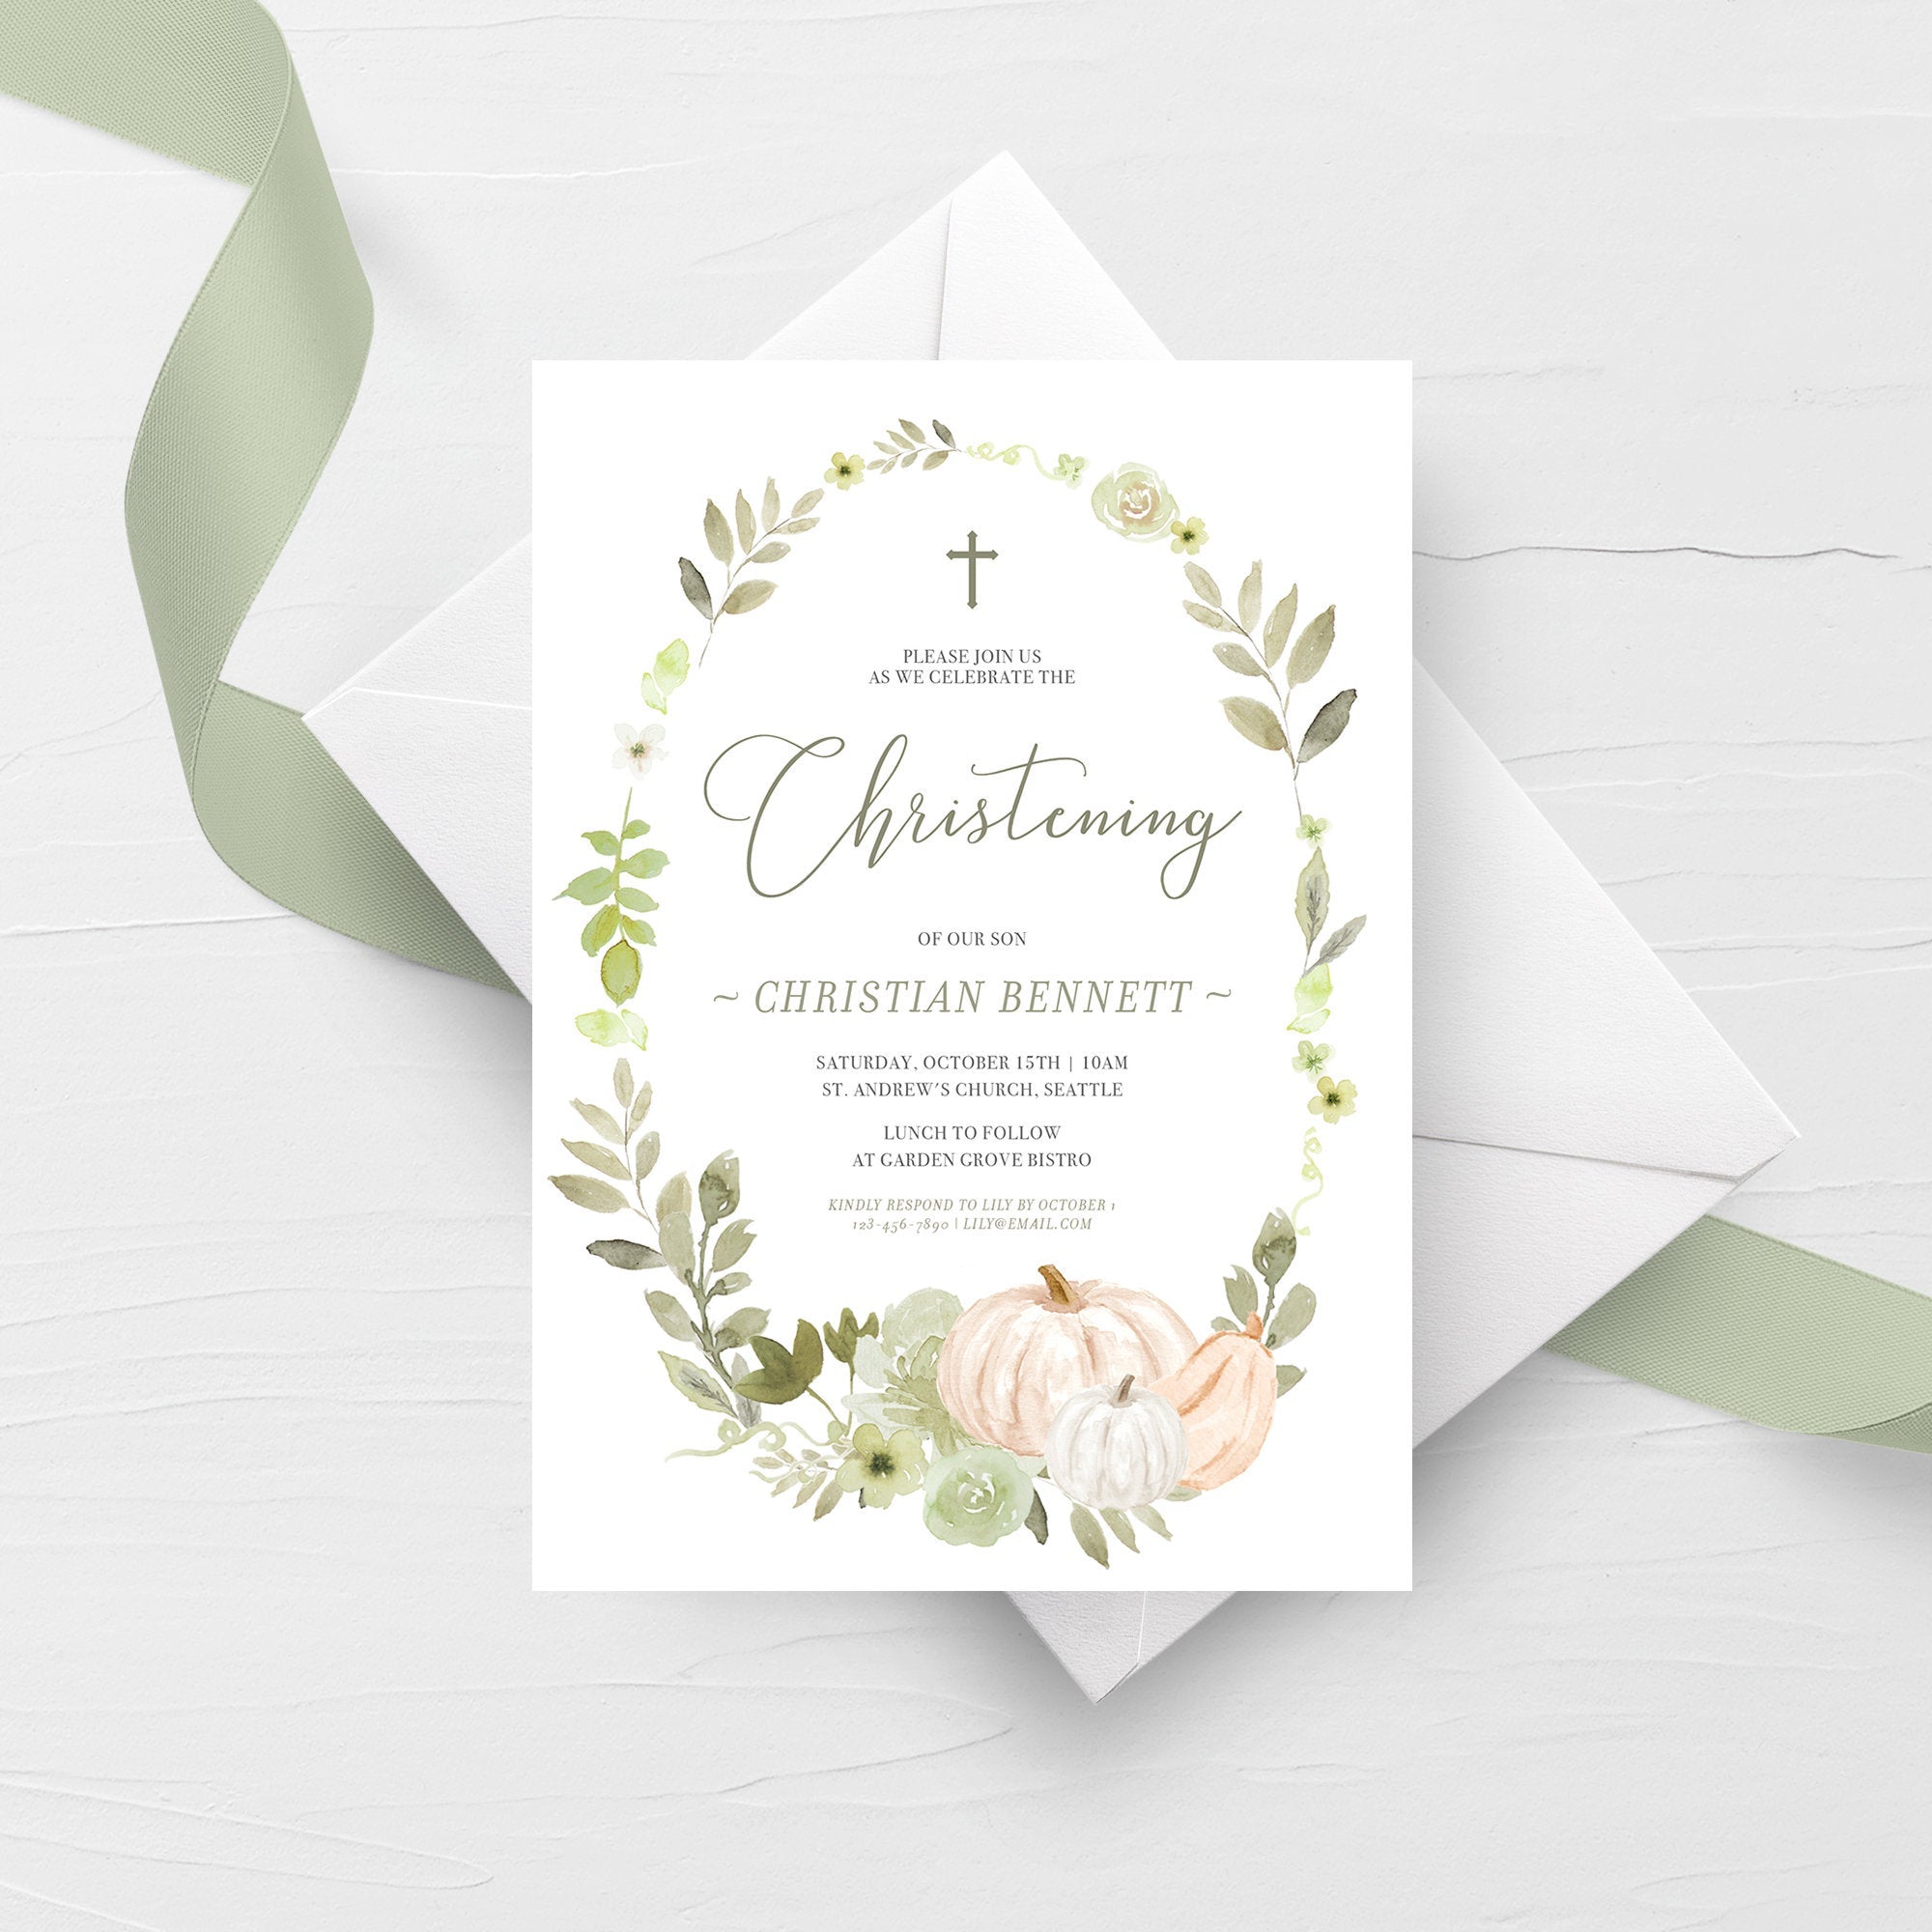 Christening Invitation Template, Fall Christening Invite, Pumpkin Greenery Christening Invitation Printable, 5x7 INSTANT DOWNLOAD PG100